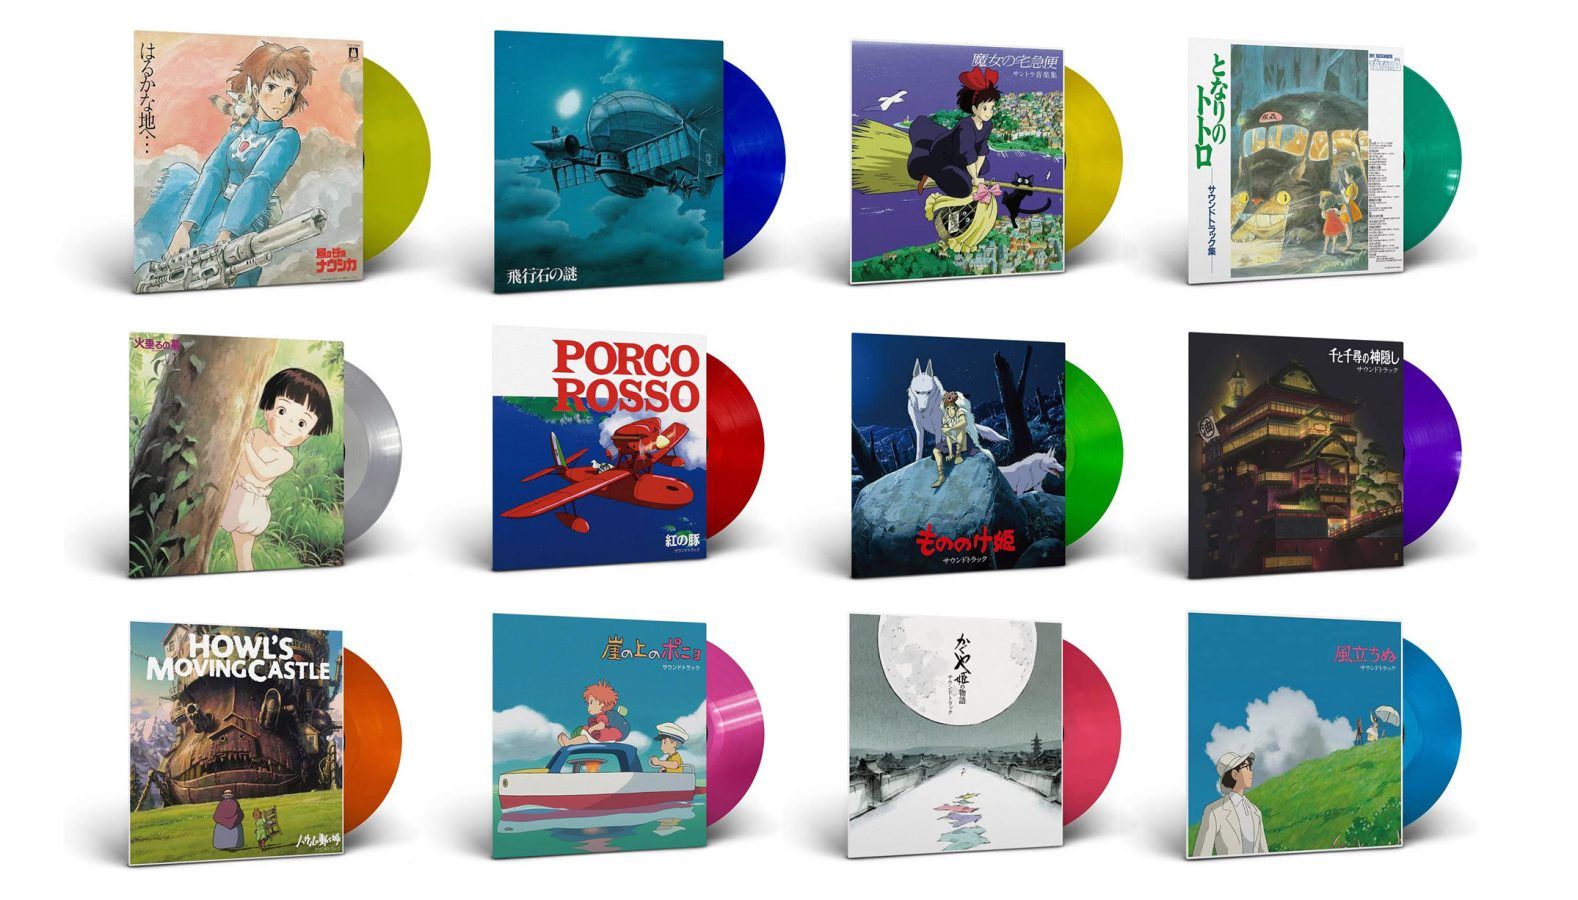 Studio re-issues studio soundtracks on limited edition